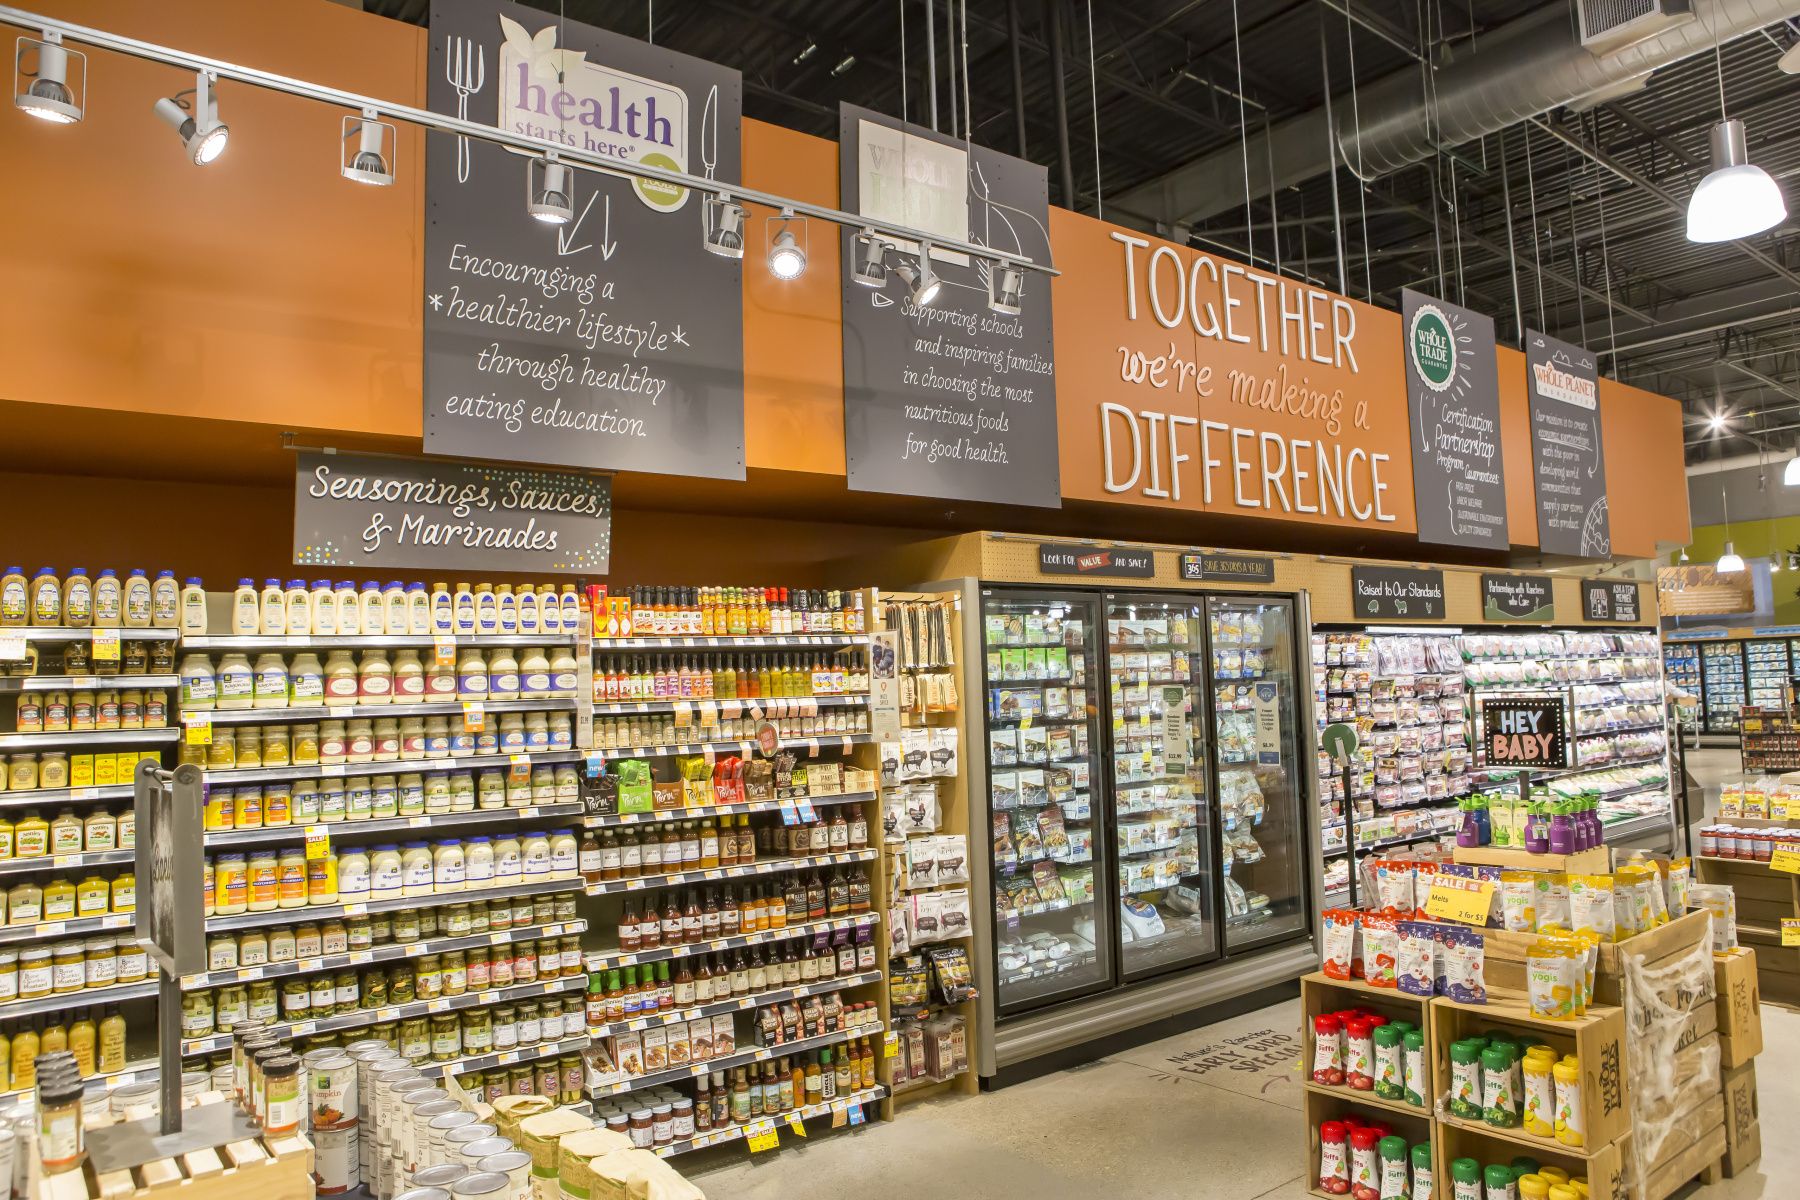 Nationwide Fixture Installations Inc Whole Foods Case Study New Store Installation Millwork Packages Program Management Signage Site Surveys